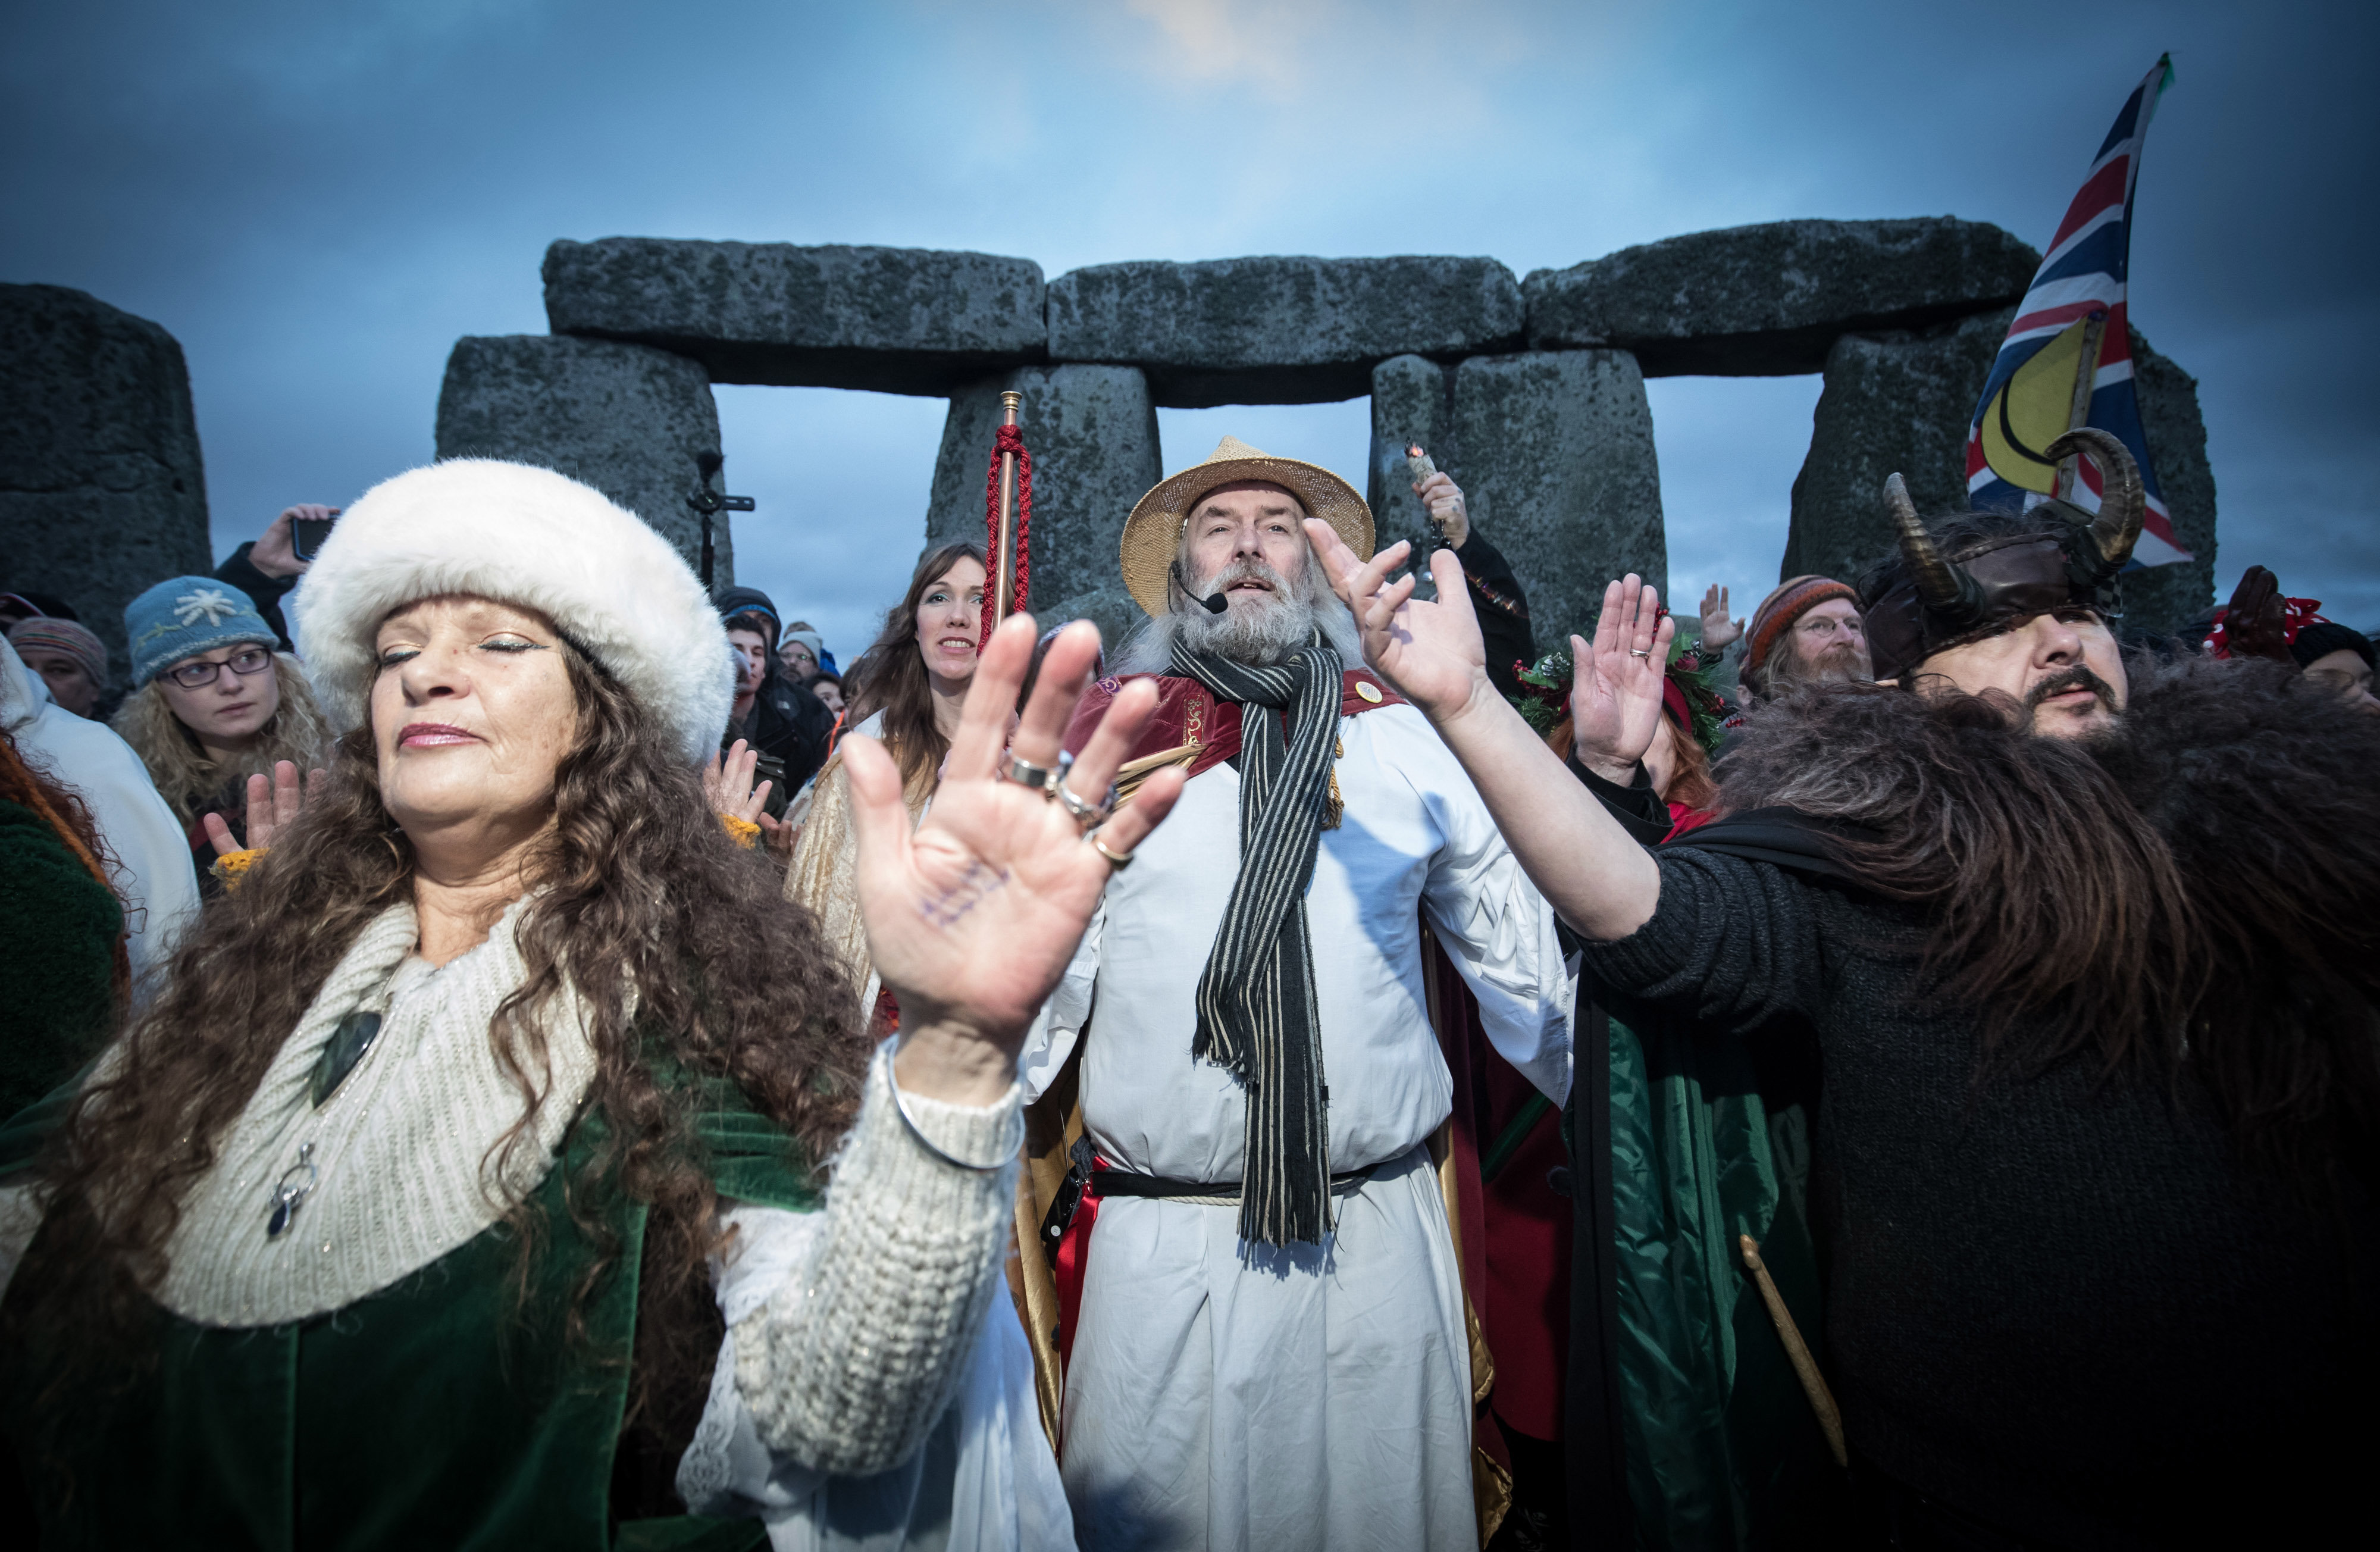 <strong>Druids, pagans and revellers gather in Stonehenge at the winter solstice ceremony in 2016</strong>